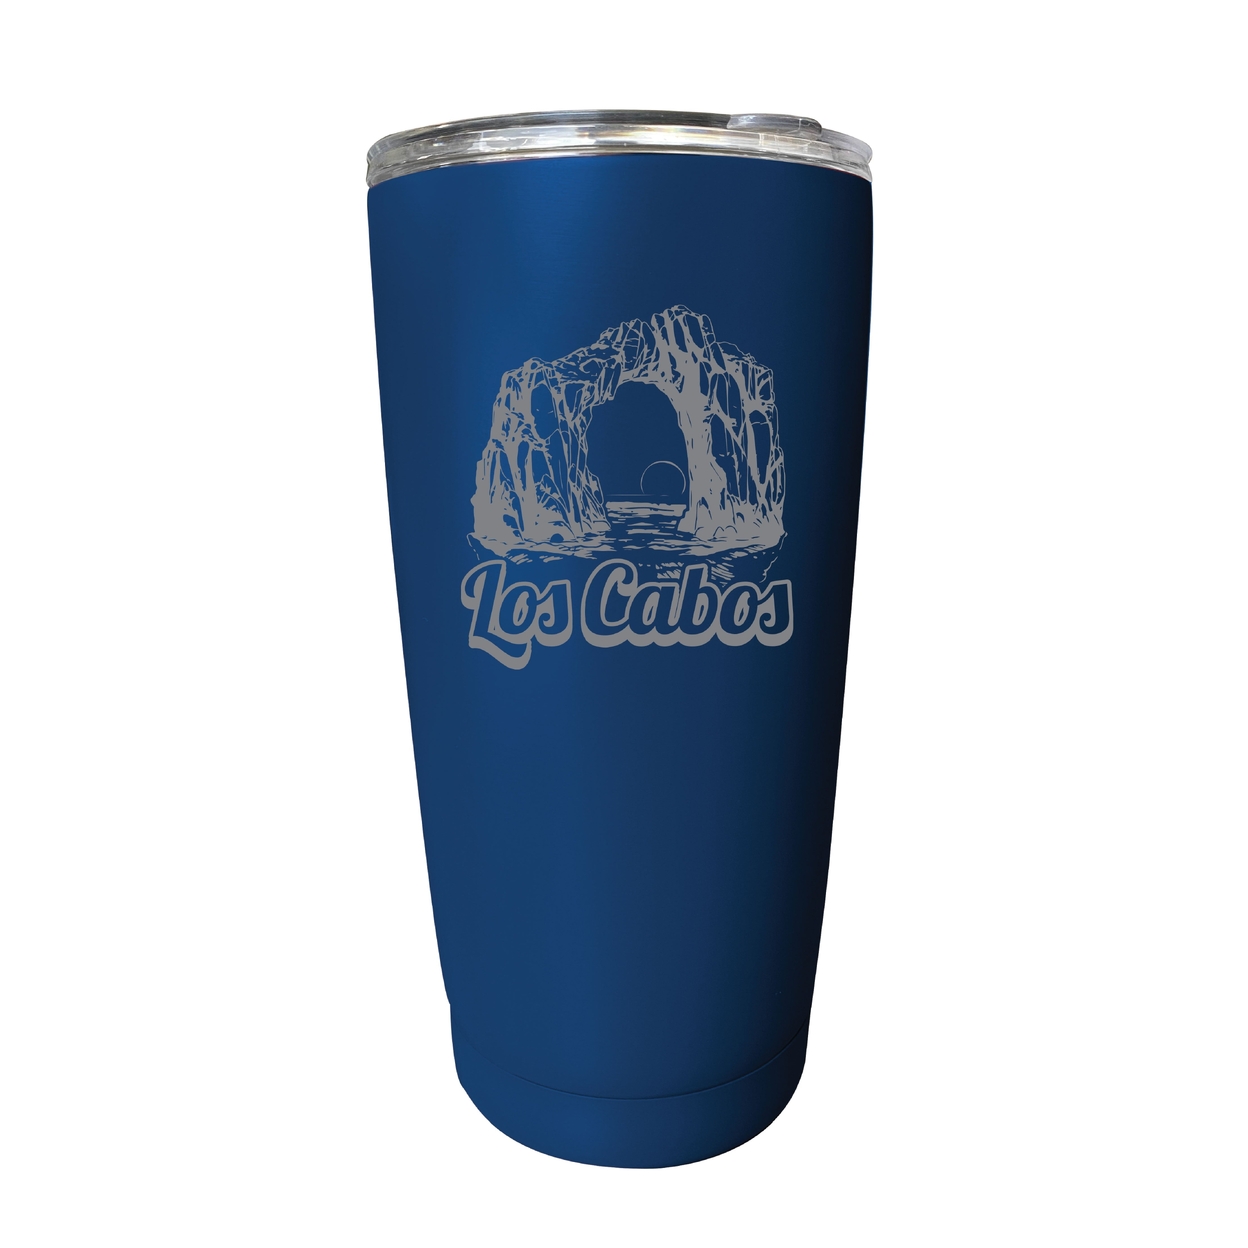 Los Cabos Mexico Souvenir 16 Oz Engraved Stainless Steel Insulated Tumbler - Navy,,2-Pack